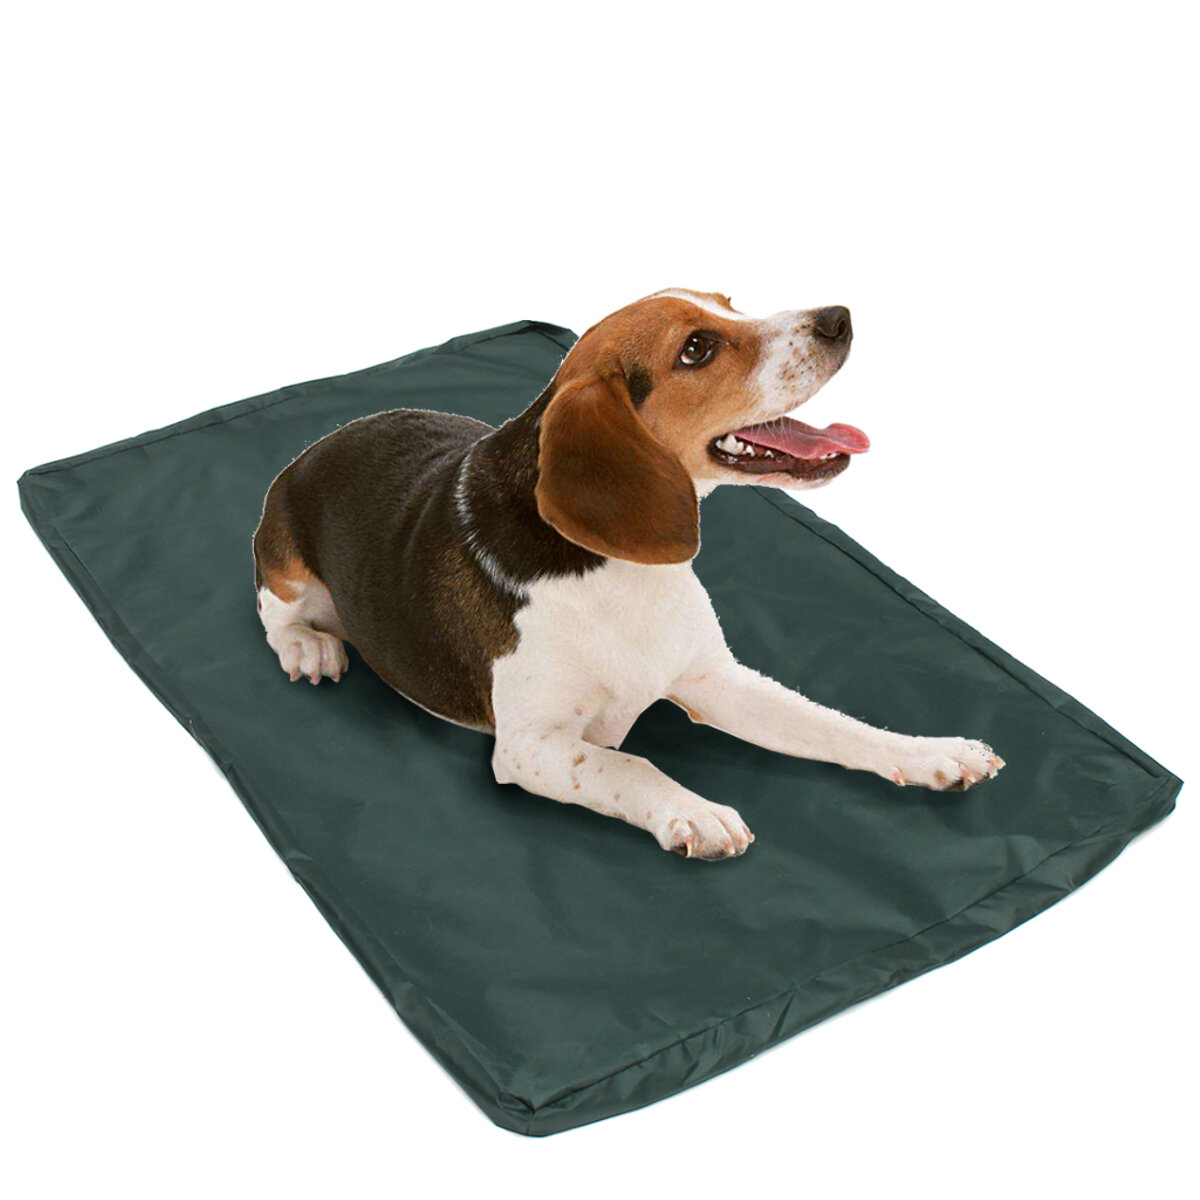 Home waterproof dog bed large washable 